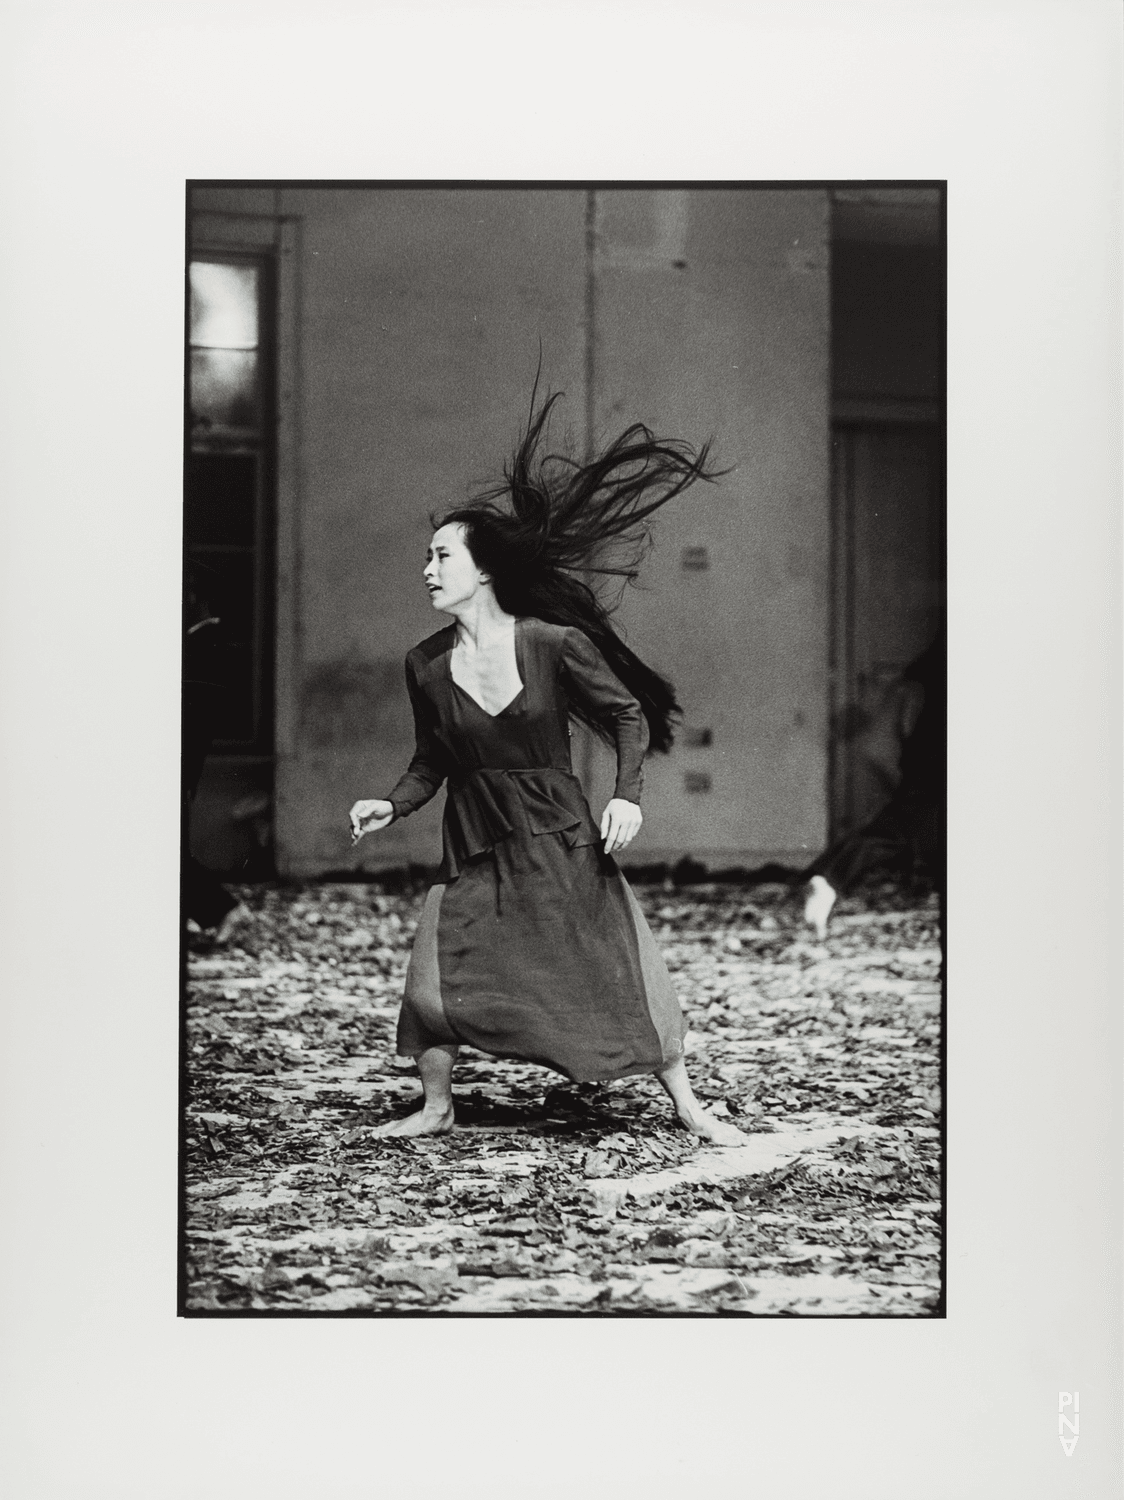 Kyomi Ichida in “Bluebeard. While Listening to a Tape Recording of Béla Bartók's Opera "Duke Bluebeard's Castle"” by Pina Bausch